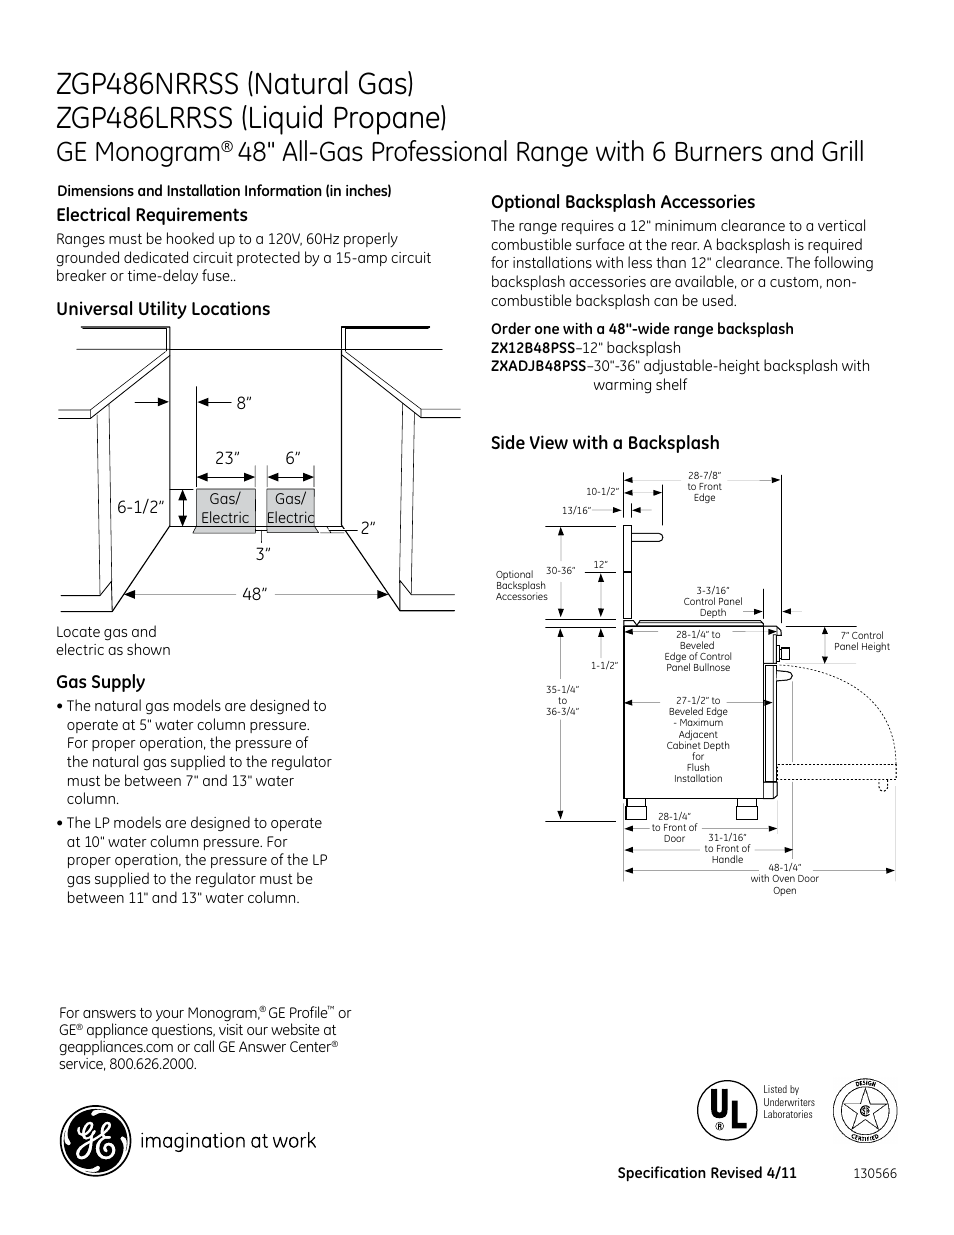 Ge monogram, Electrical requirements, Optional backsplash accessories | Side view with a backsplash gas supply, Universal utility locations | GE ZGP486NRRSS User Manual | Page 2 / 3